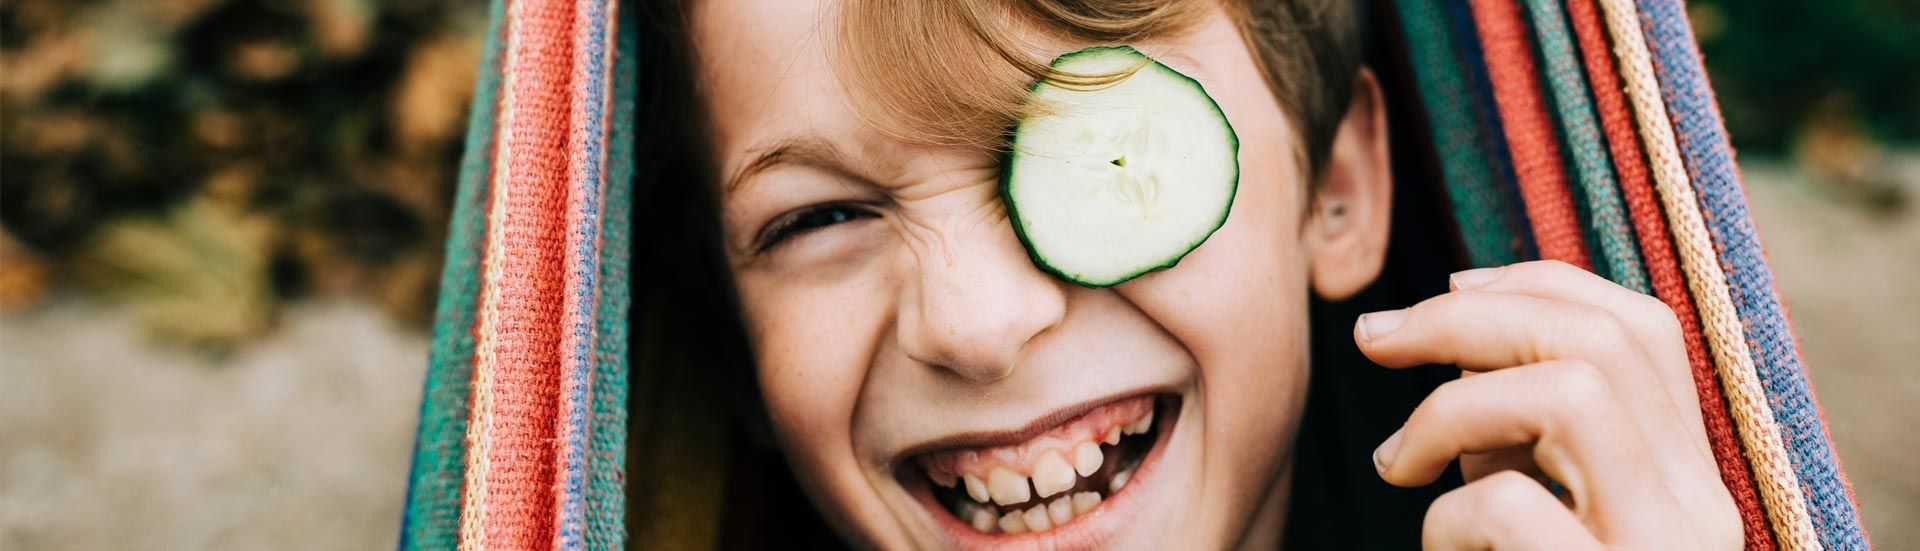 boy with cucumber on his eye